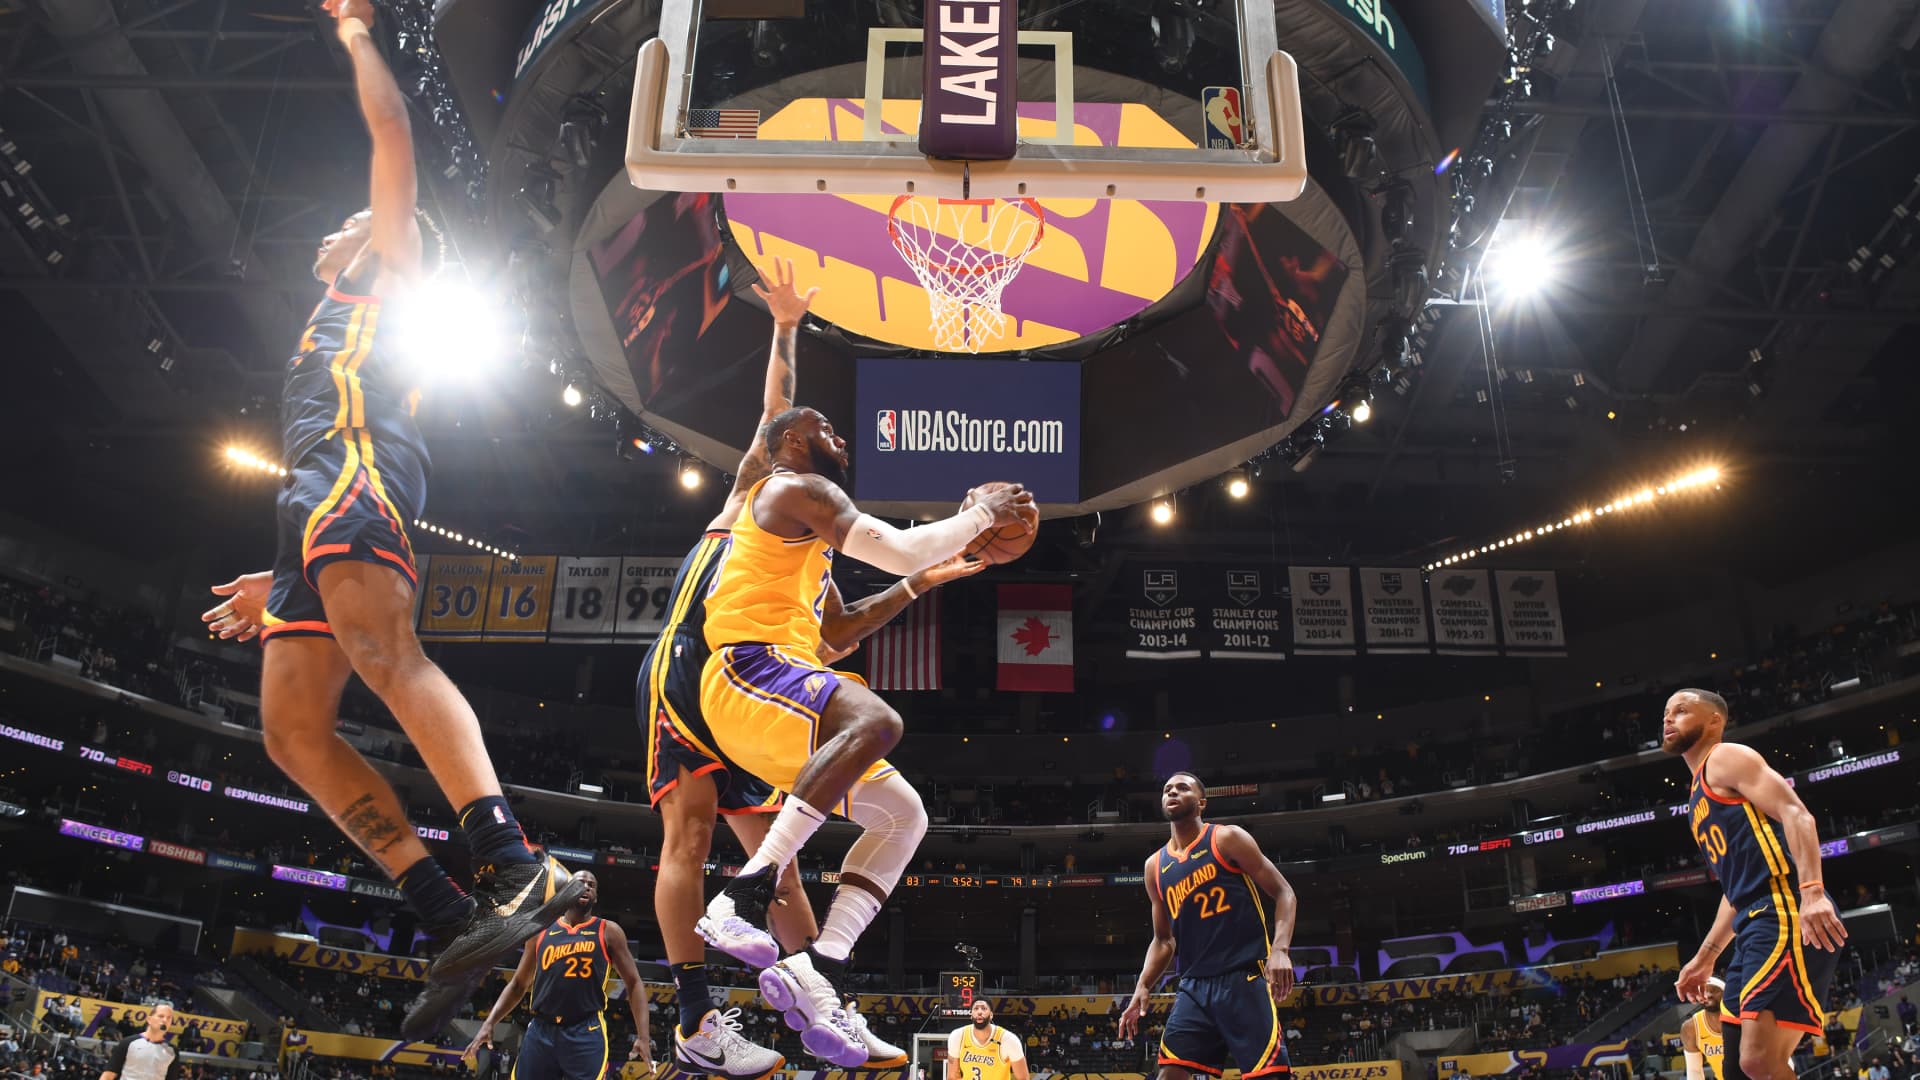 LeBron James #23 of the Los Angeles Lakers drives to the basket against the Golden State Warriors during the 2021 NBA Play-In Tournament on May 19, 2021 at STAPLES Center in Los Angeles, California.